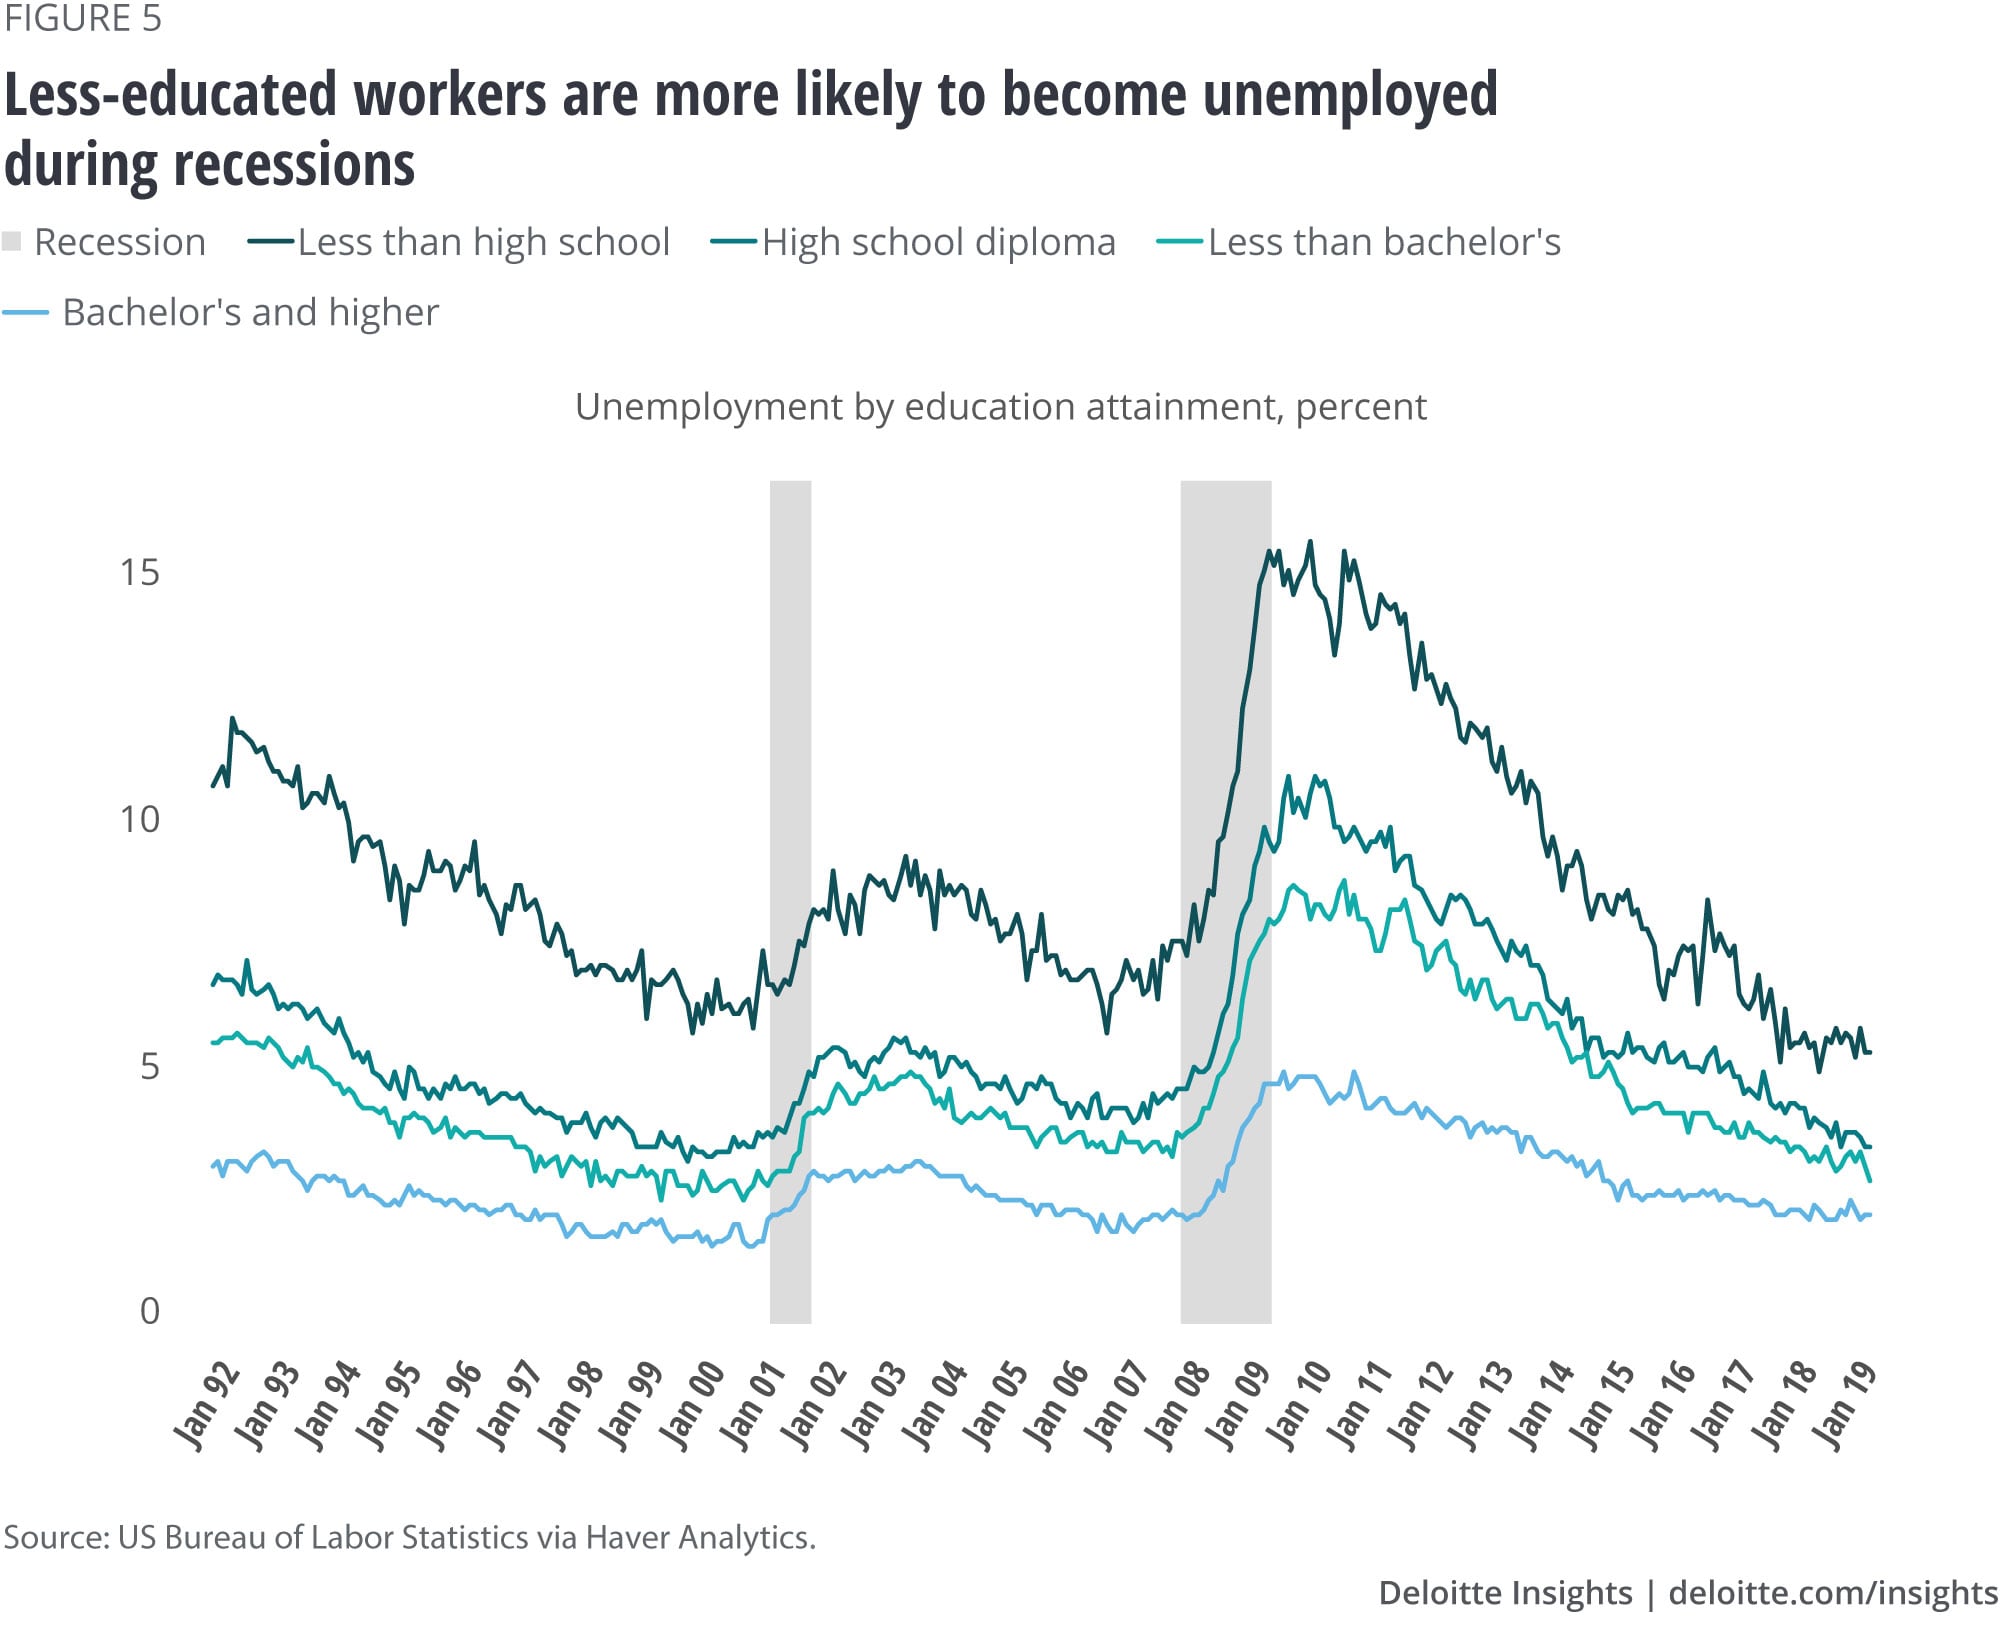 Less-educated workers are more likely to become unemployed during recessions